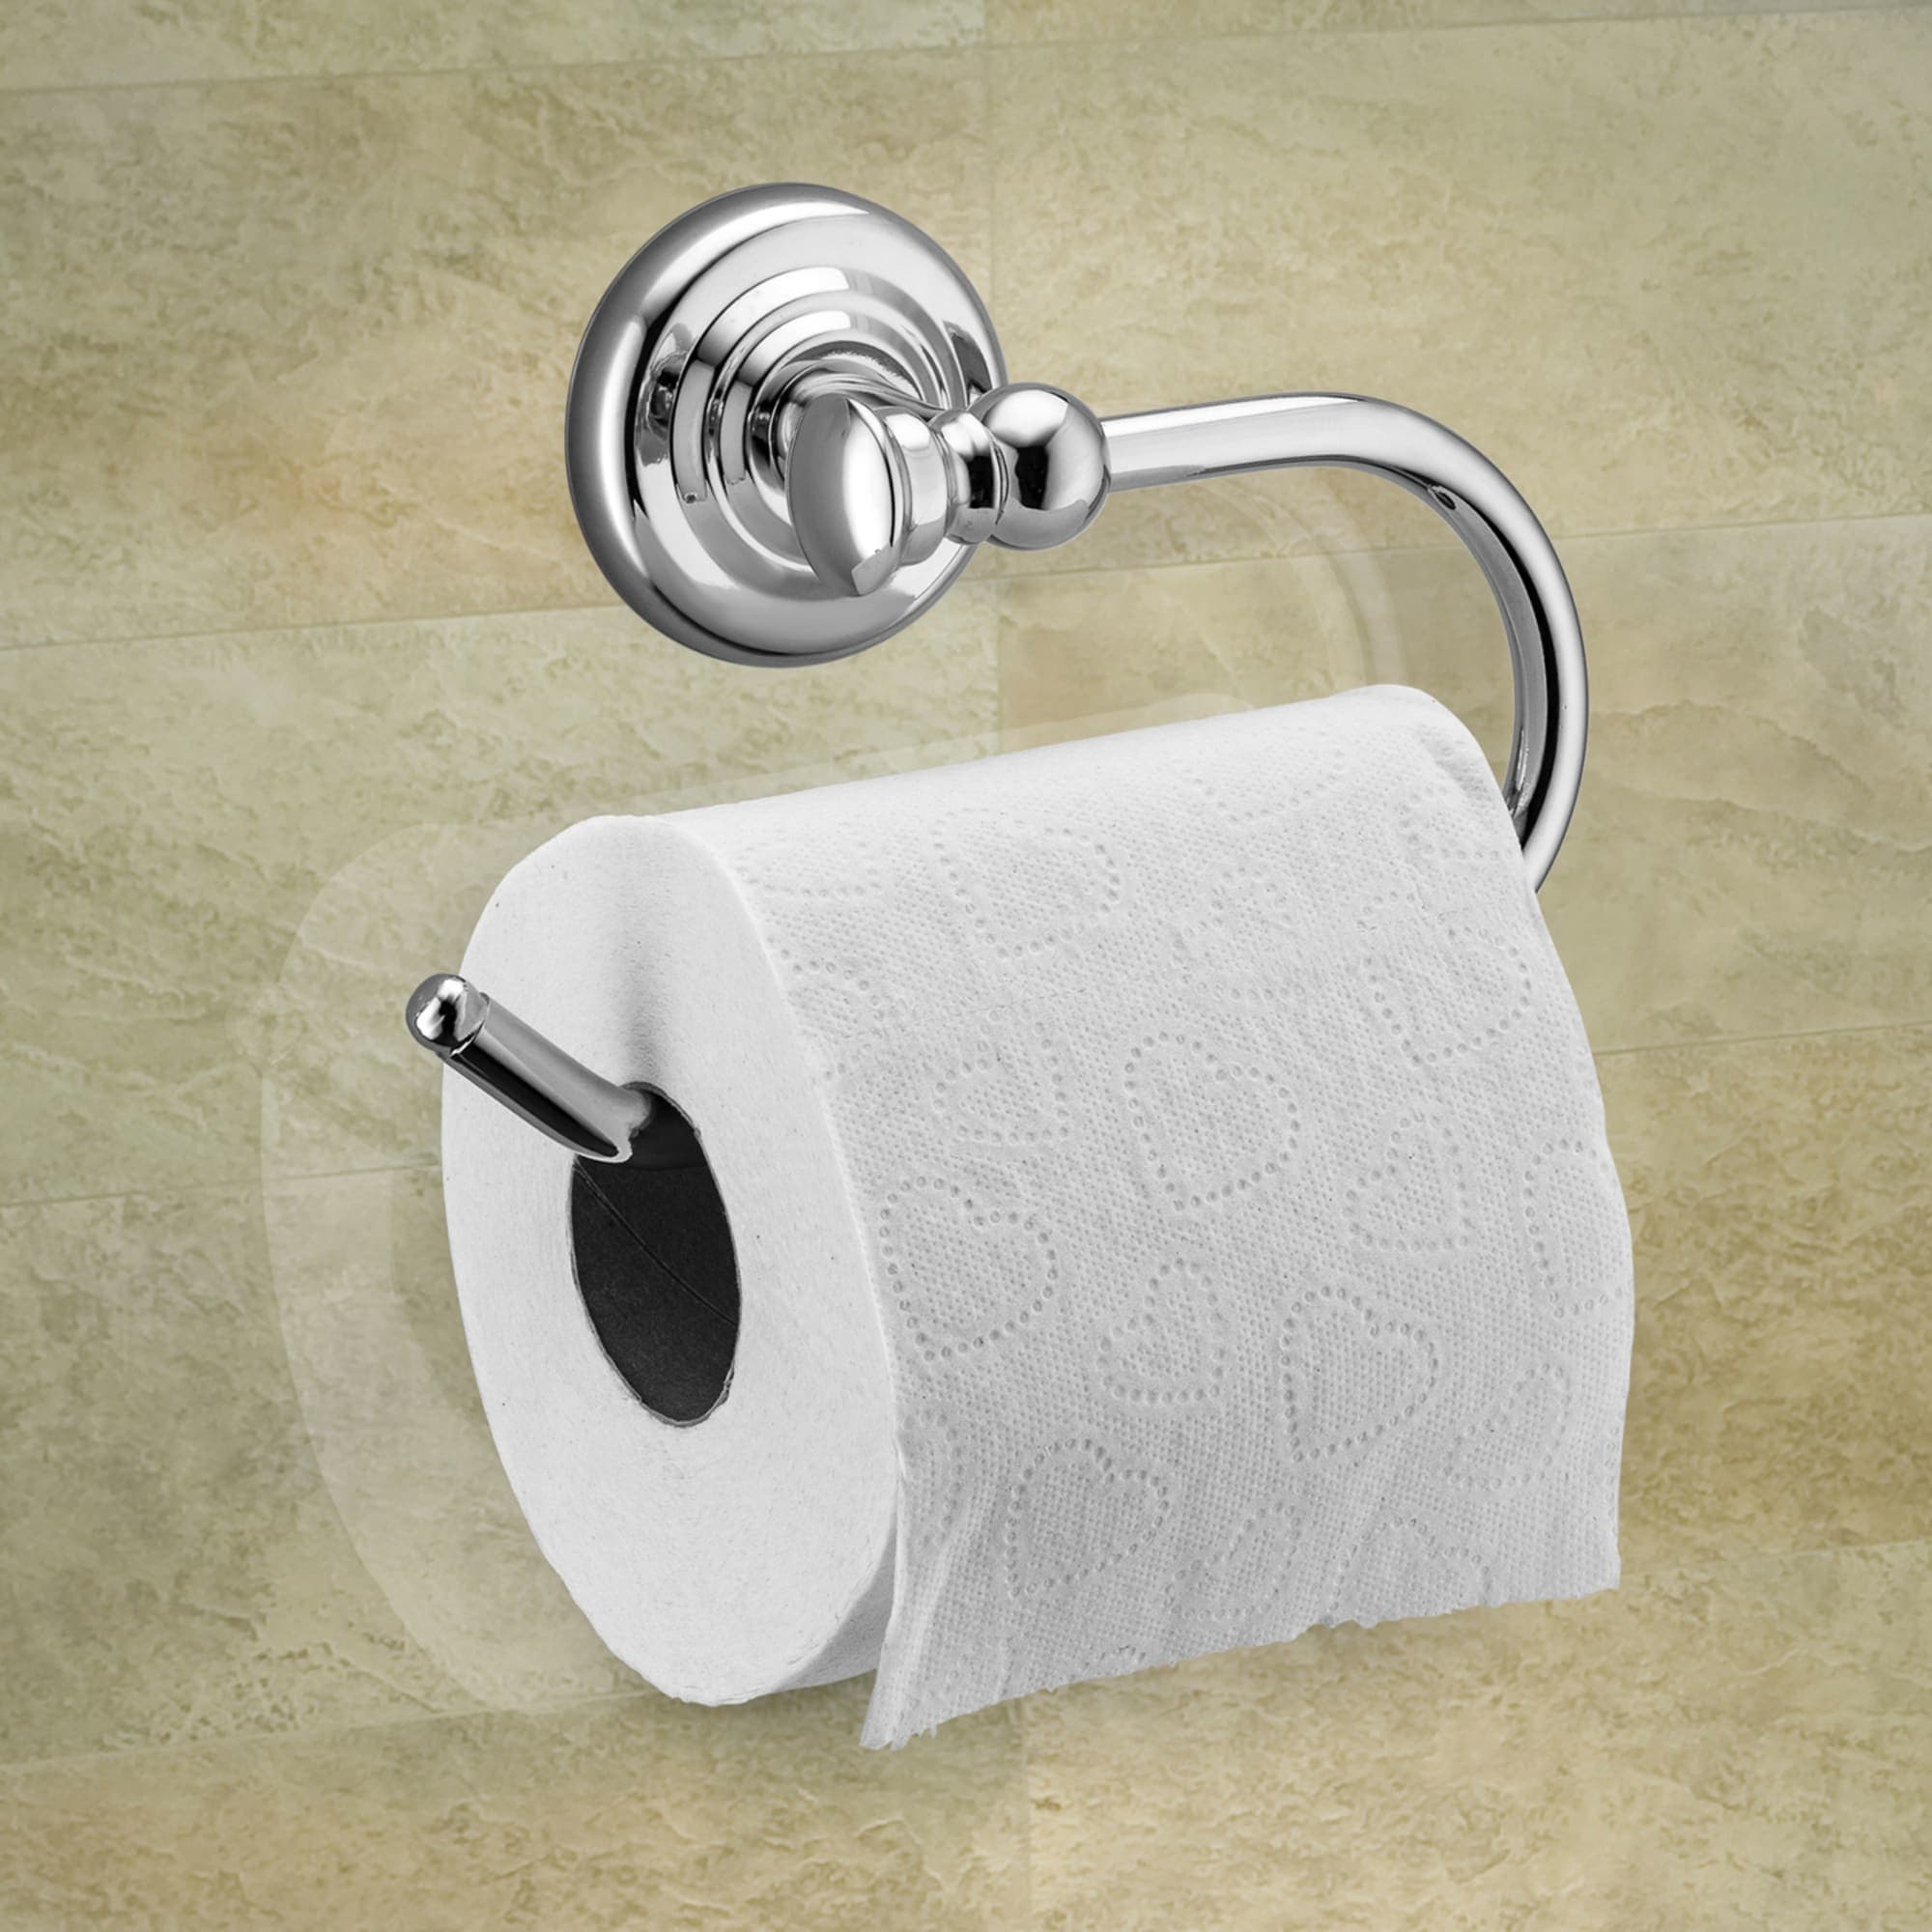 Home Basics Wall-Mounted Toilet Paper Holder $8.00 EACH, CASE PACK OF 12